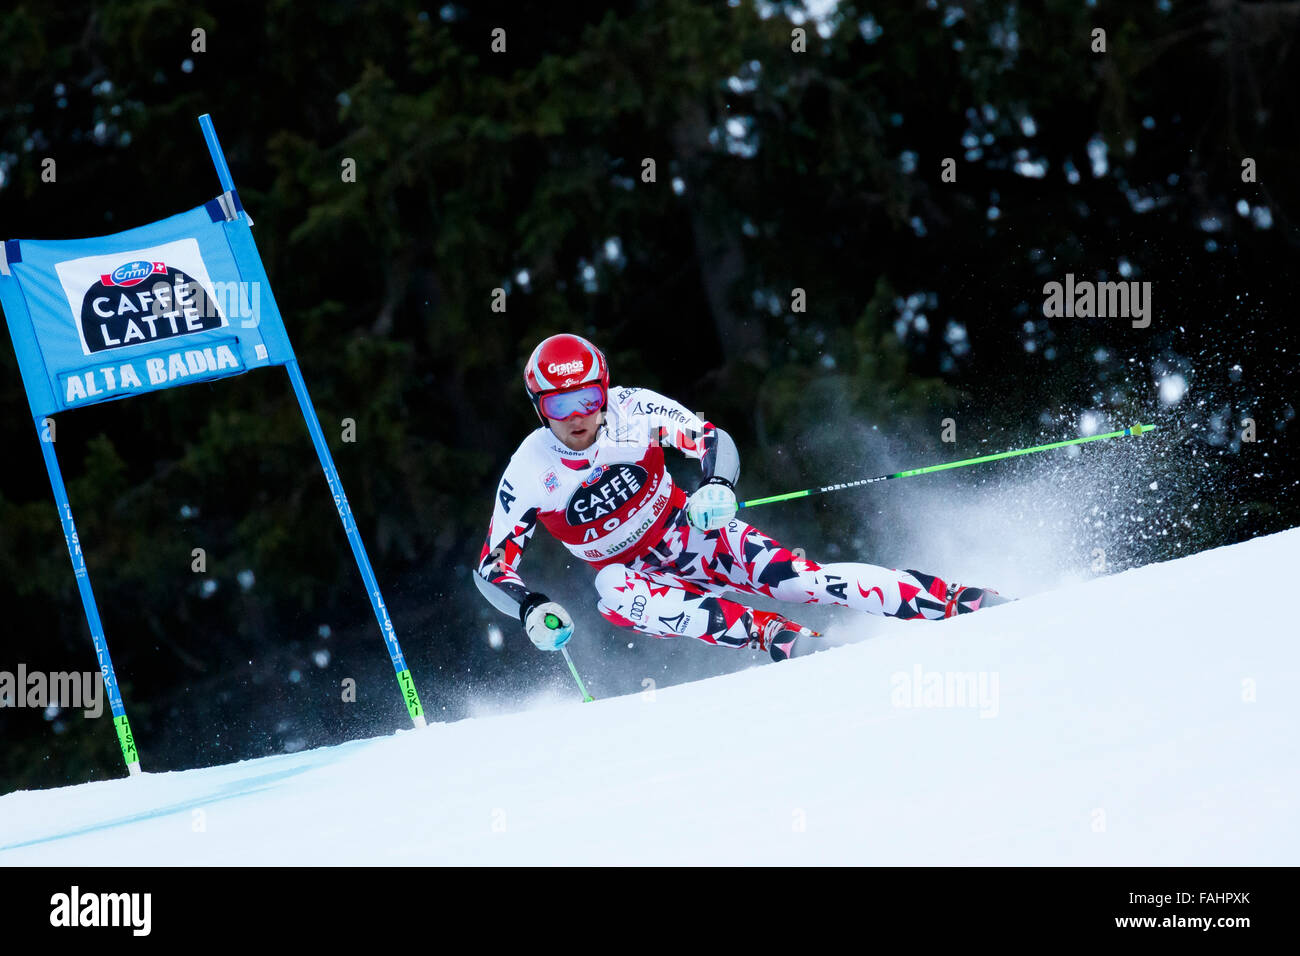 Alta Badia, Italy 20 December 2015.  SCHWARZ Marco (Aut) competing in the Audi Fis Alpine Skiing World Cup Men’s Giant Slalom Stock Photo